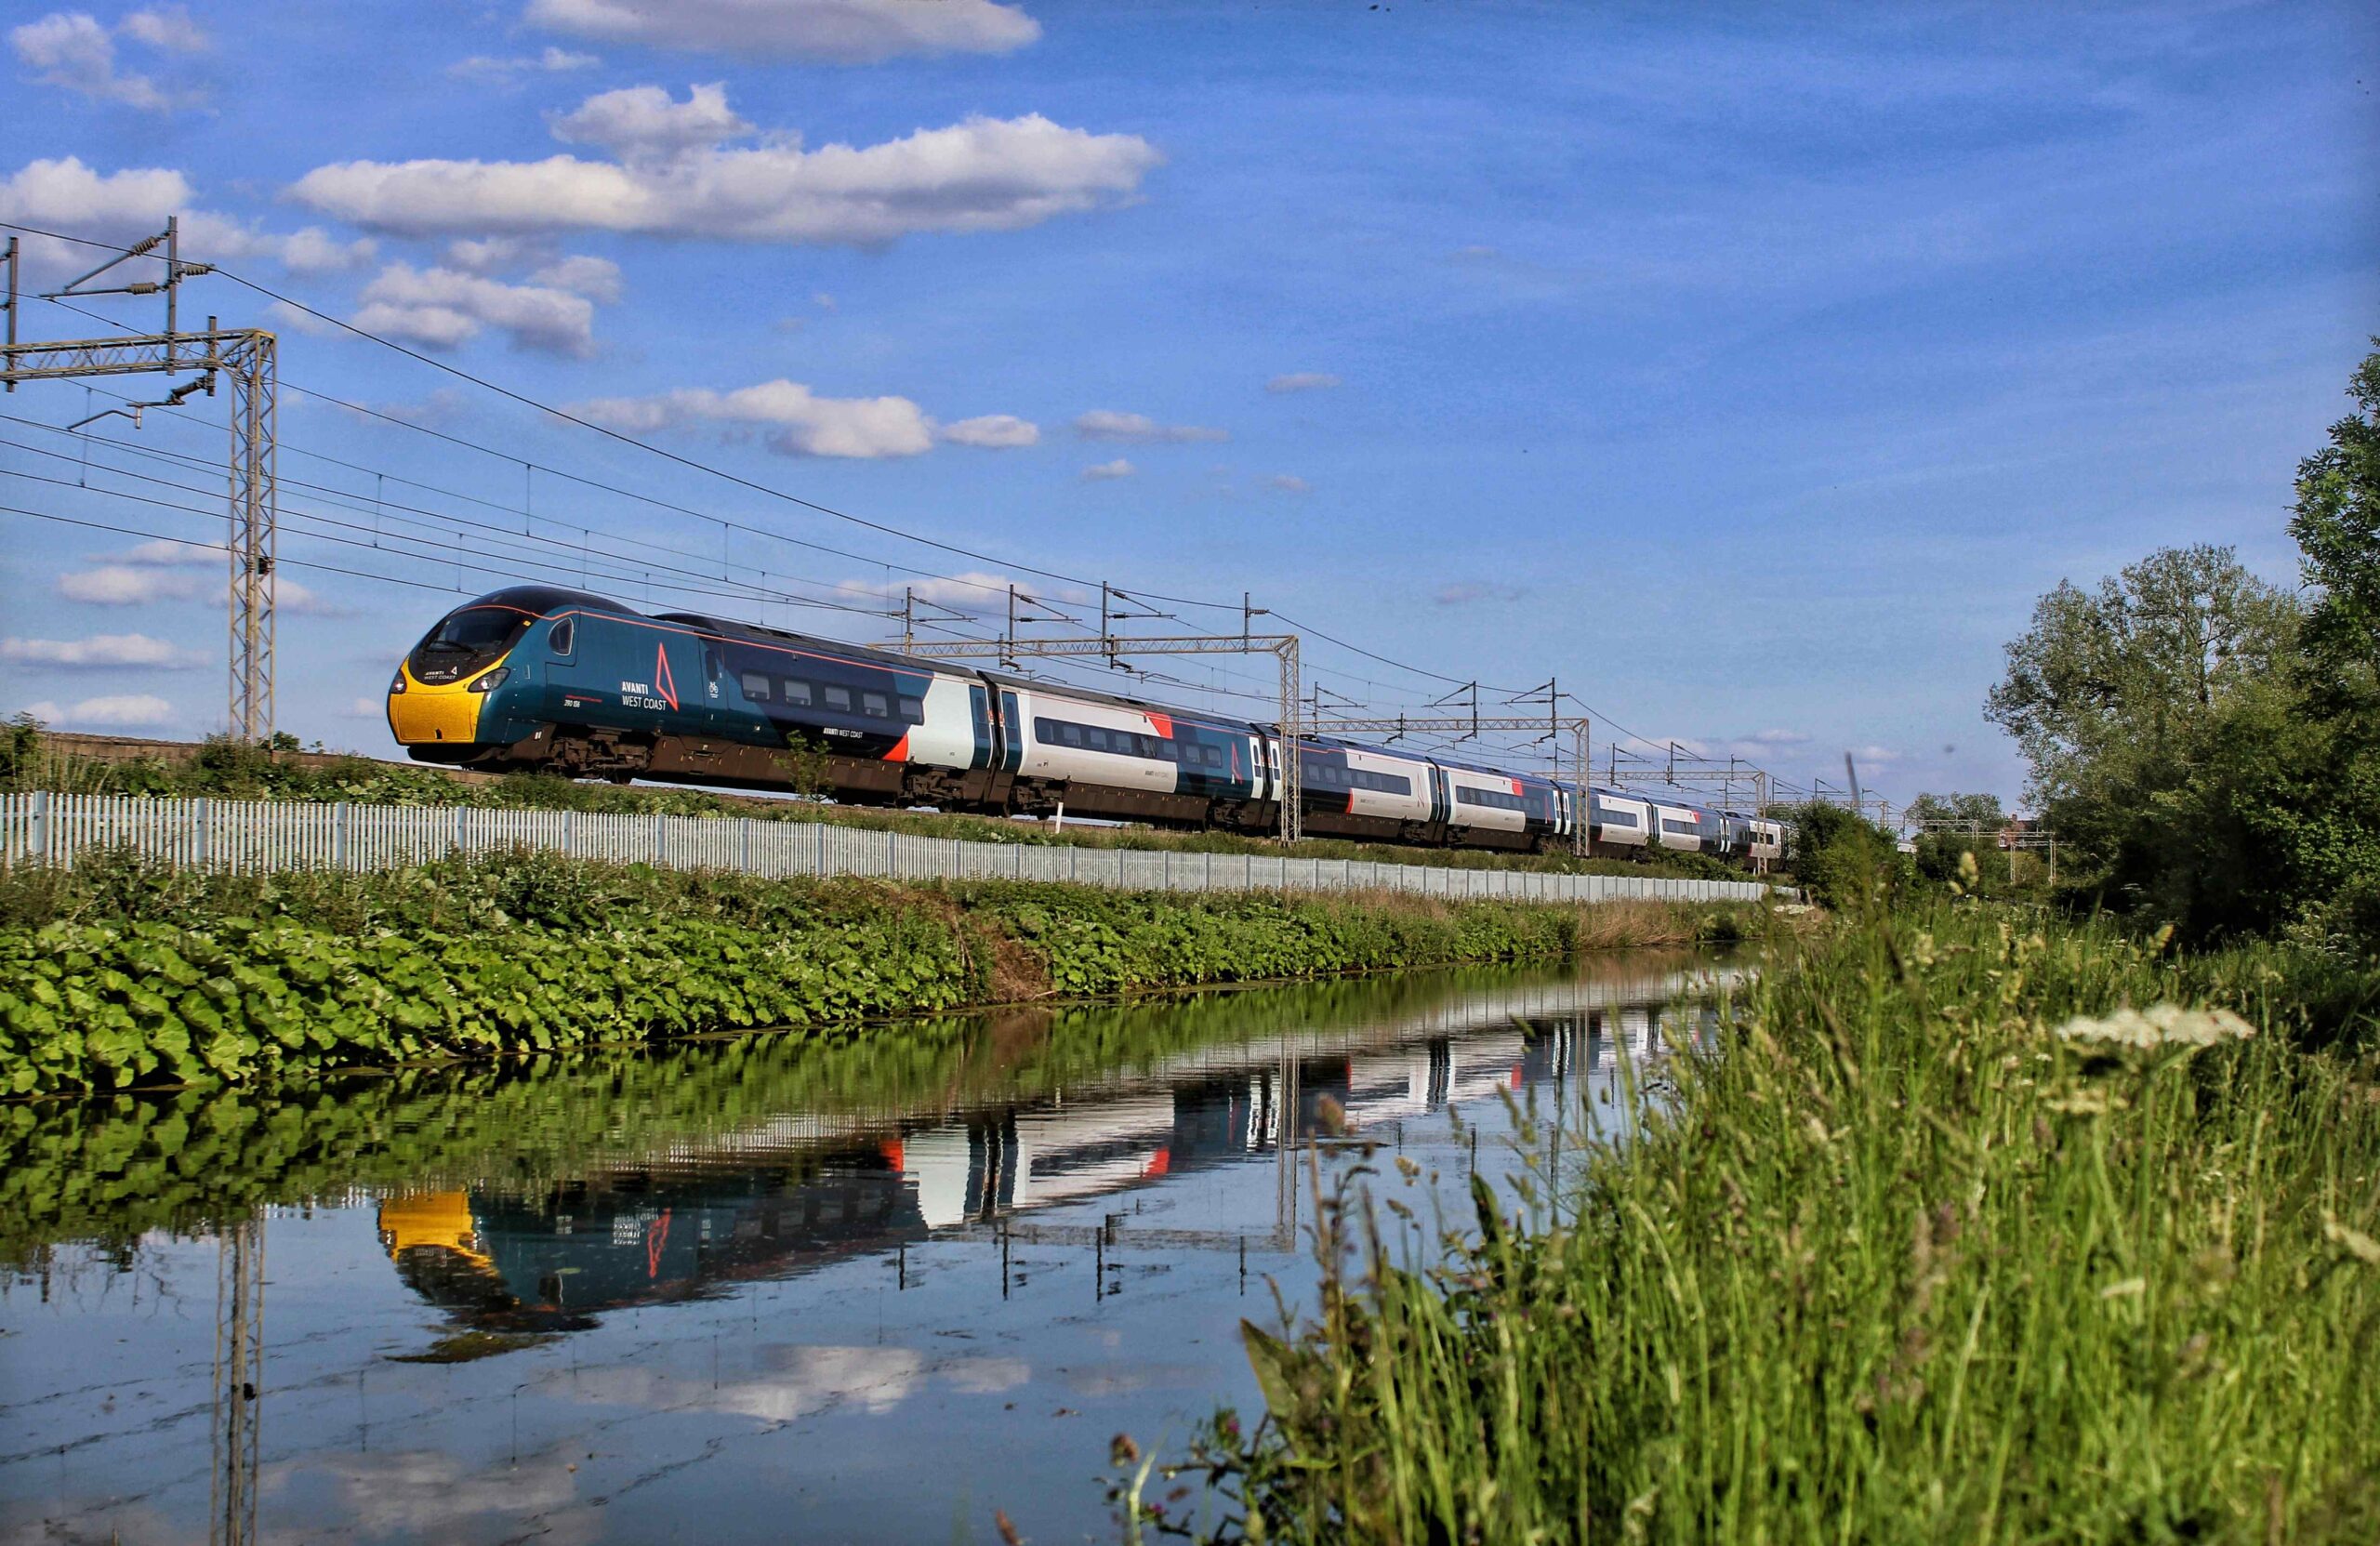 How can we deliver better rail journeys for customers?